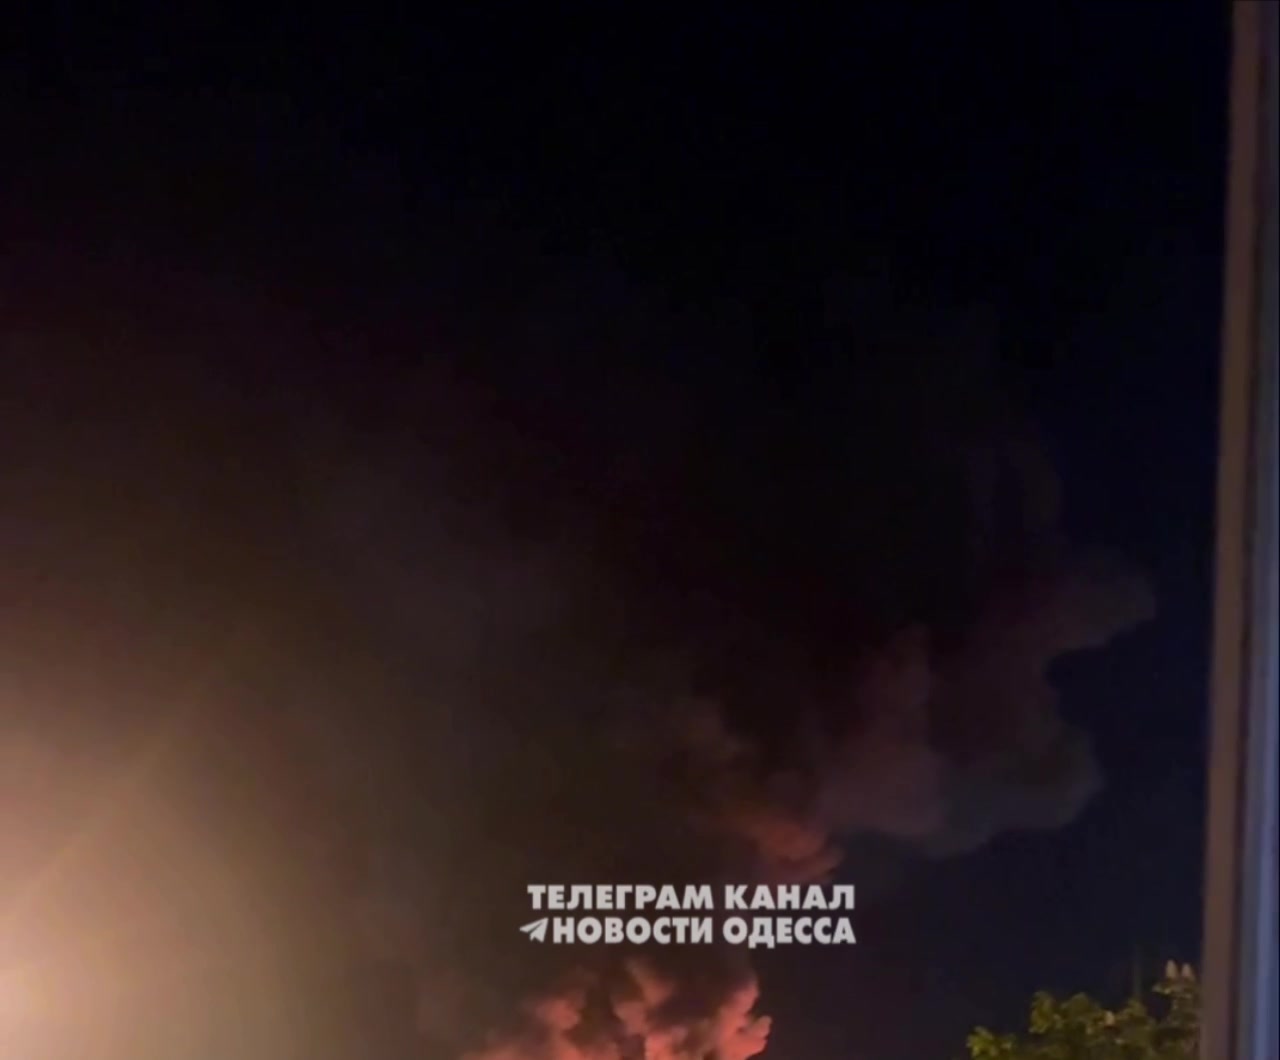 Big fire after reported missile strike in Odesa